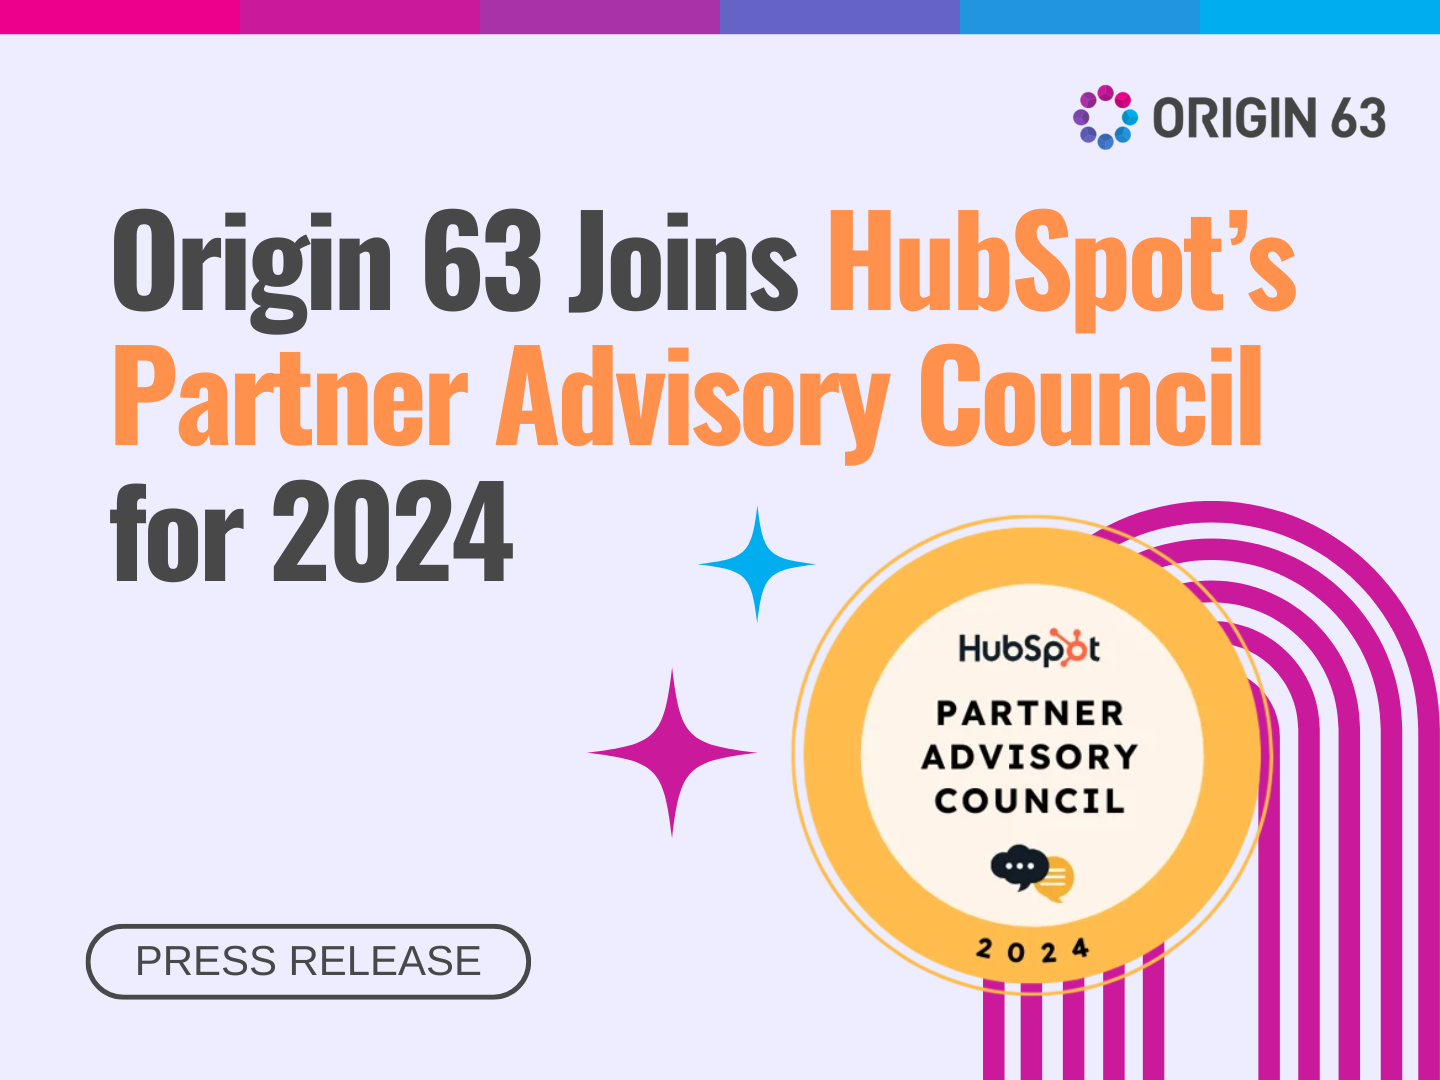 Origin 63 was named to HubSpot’s Partner Advisory Council for 2024, driving innovation to delight customers worldwide.